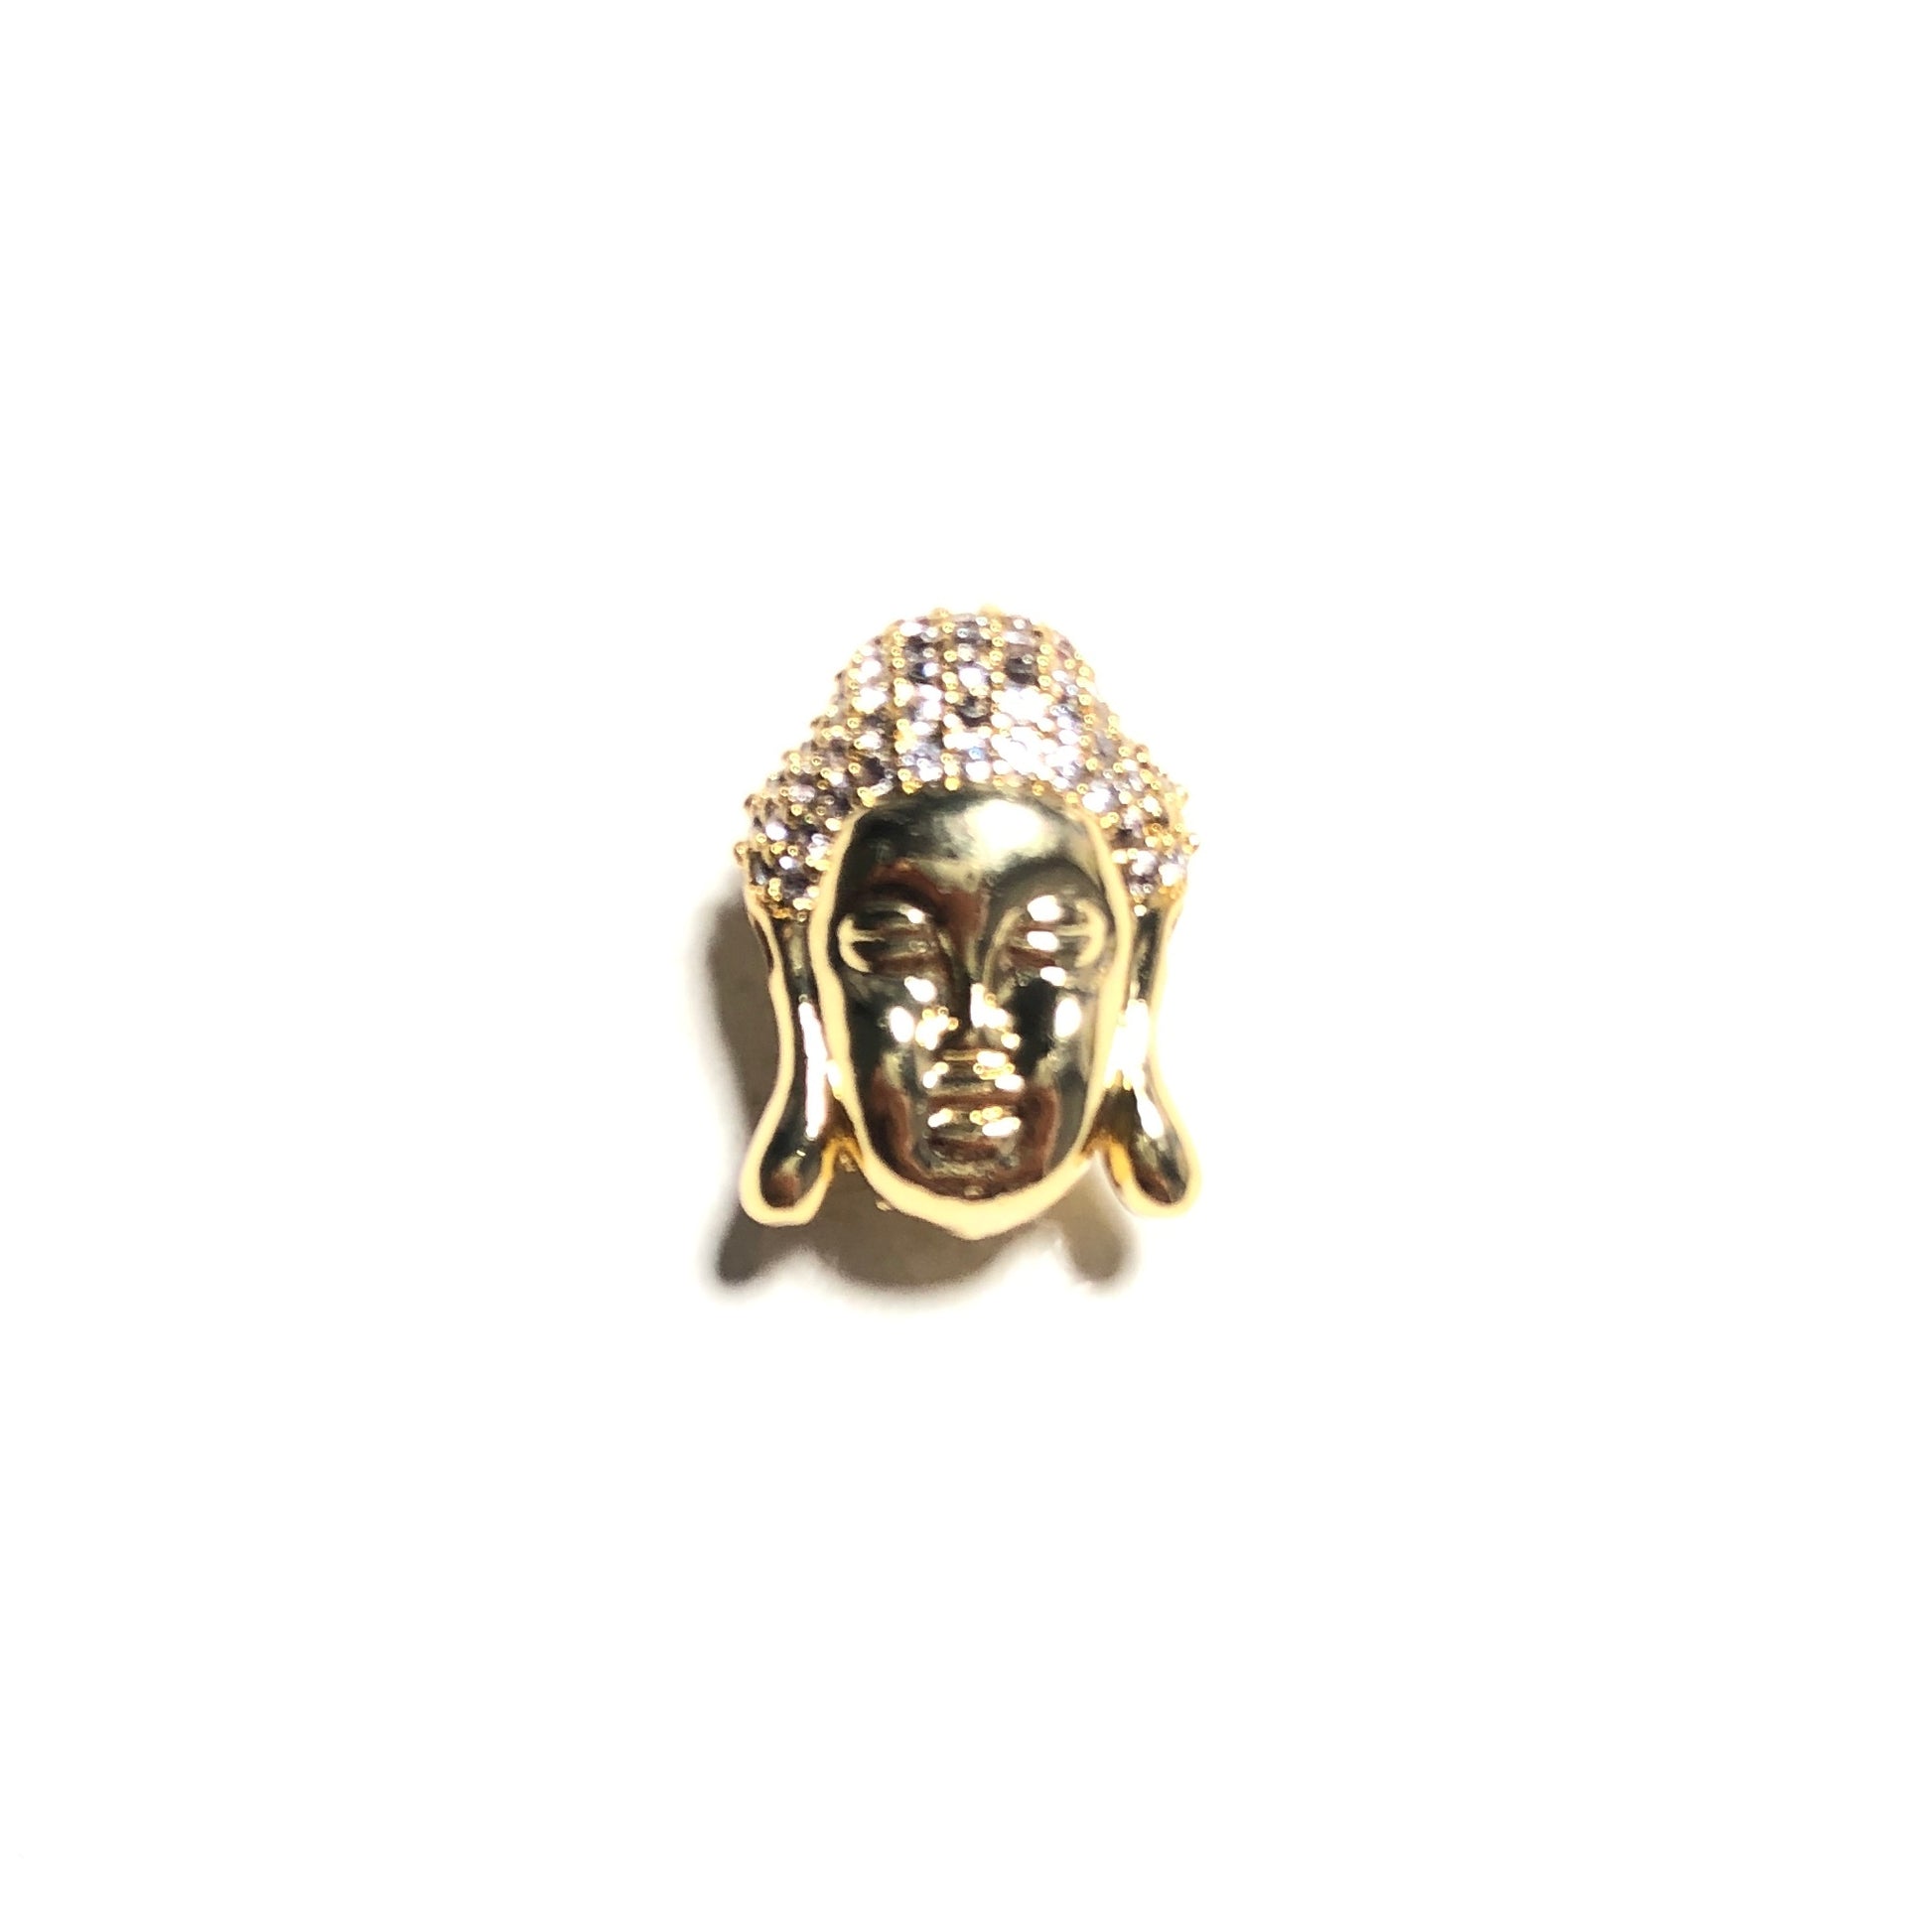 10pcs/lot 18*14mm CZ Paved Buddha Spacers Gold CZ Paved Spacers Charms Beads Beyond